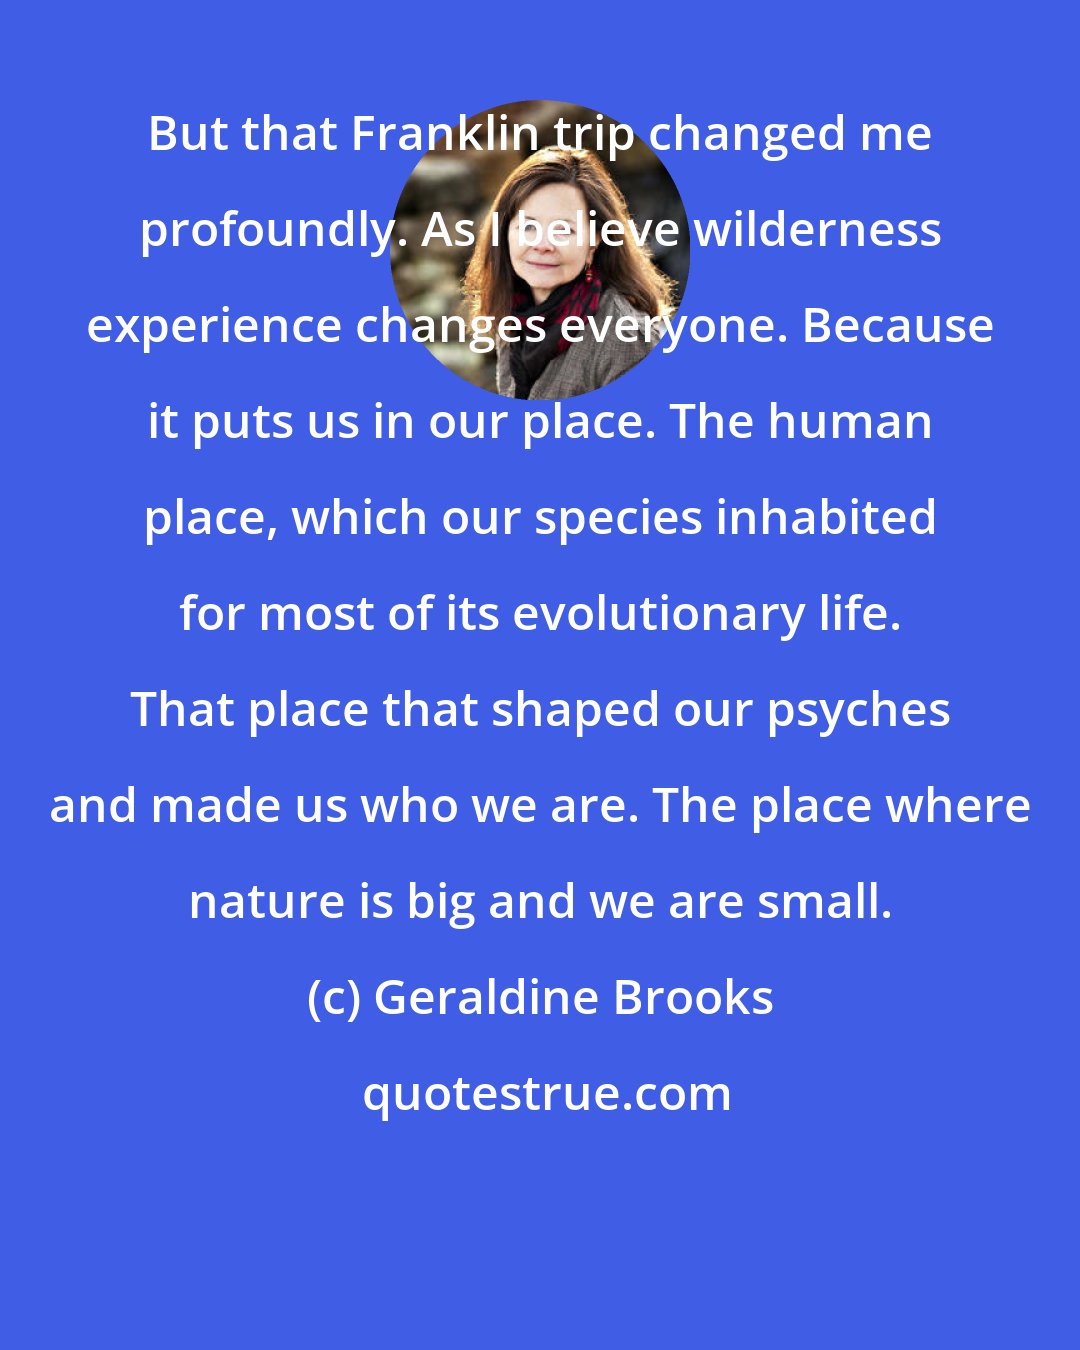 Geraldine Brooks: But that Franklin trip changed me profoundly. As I believe wilderness experience changes everyone. Because it puts us in our place. The human place, which our species inhabited for most of its evolutionary life. That place that shaped our psyches and made us who we are. The place where nature is big and we are small.